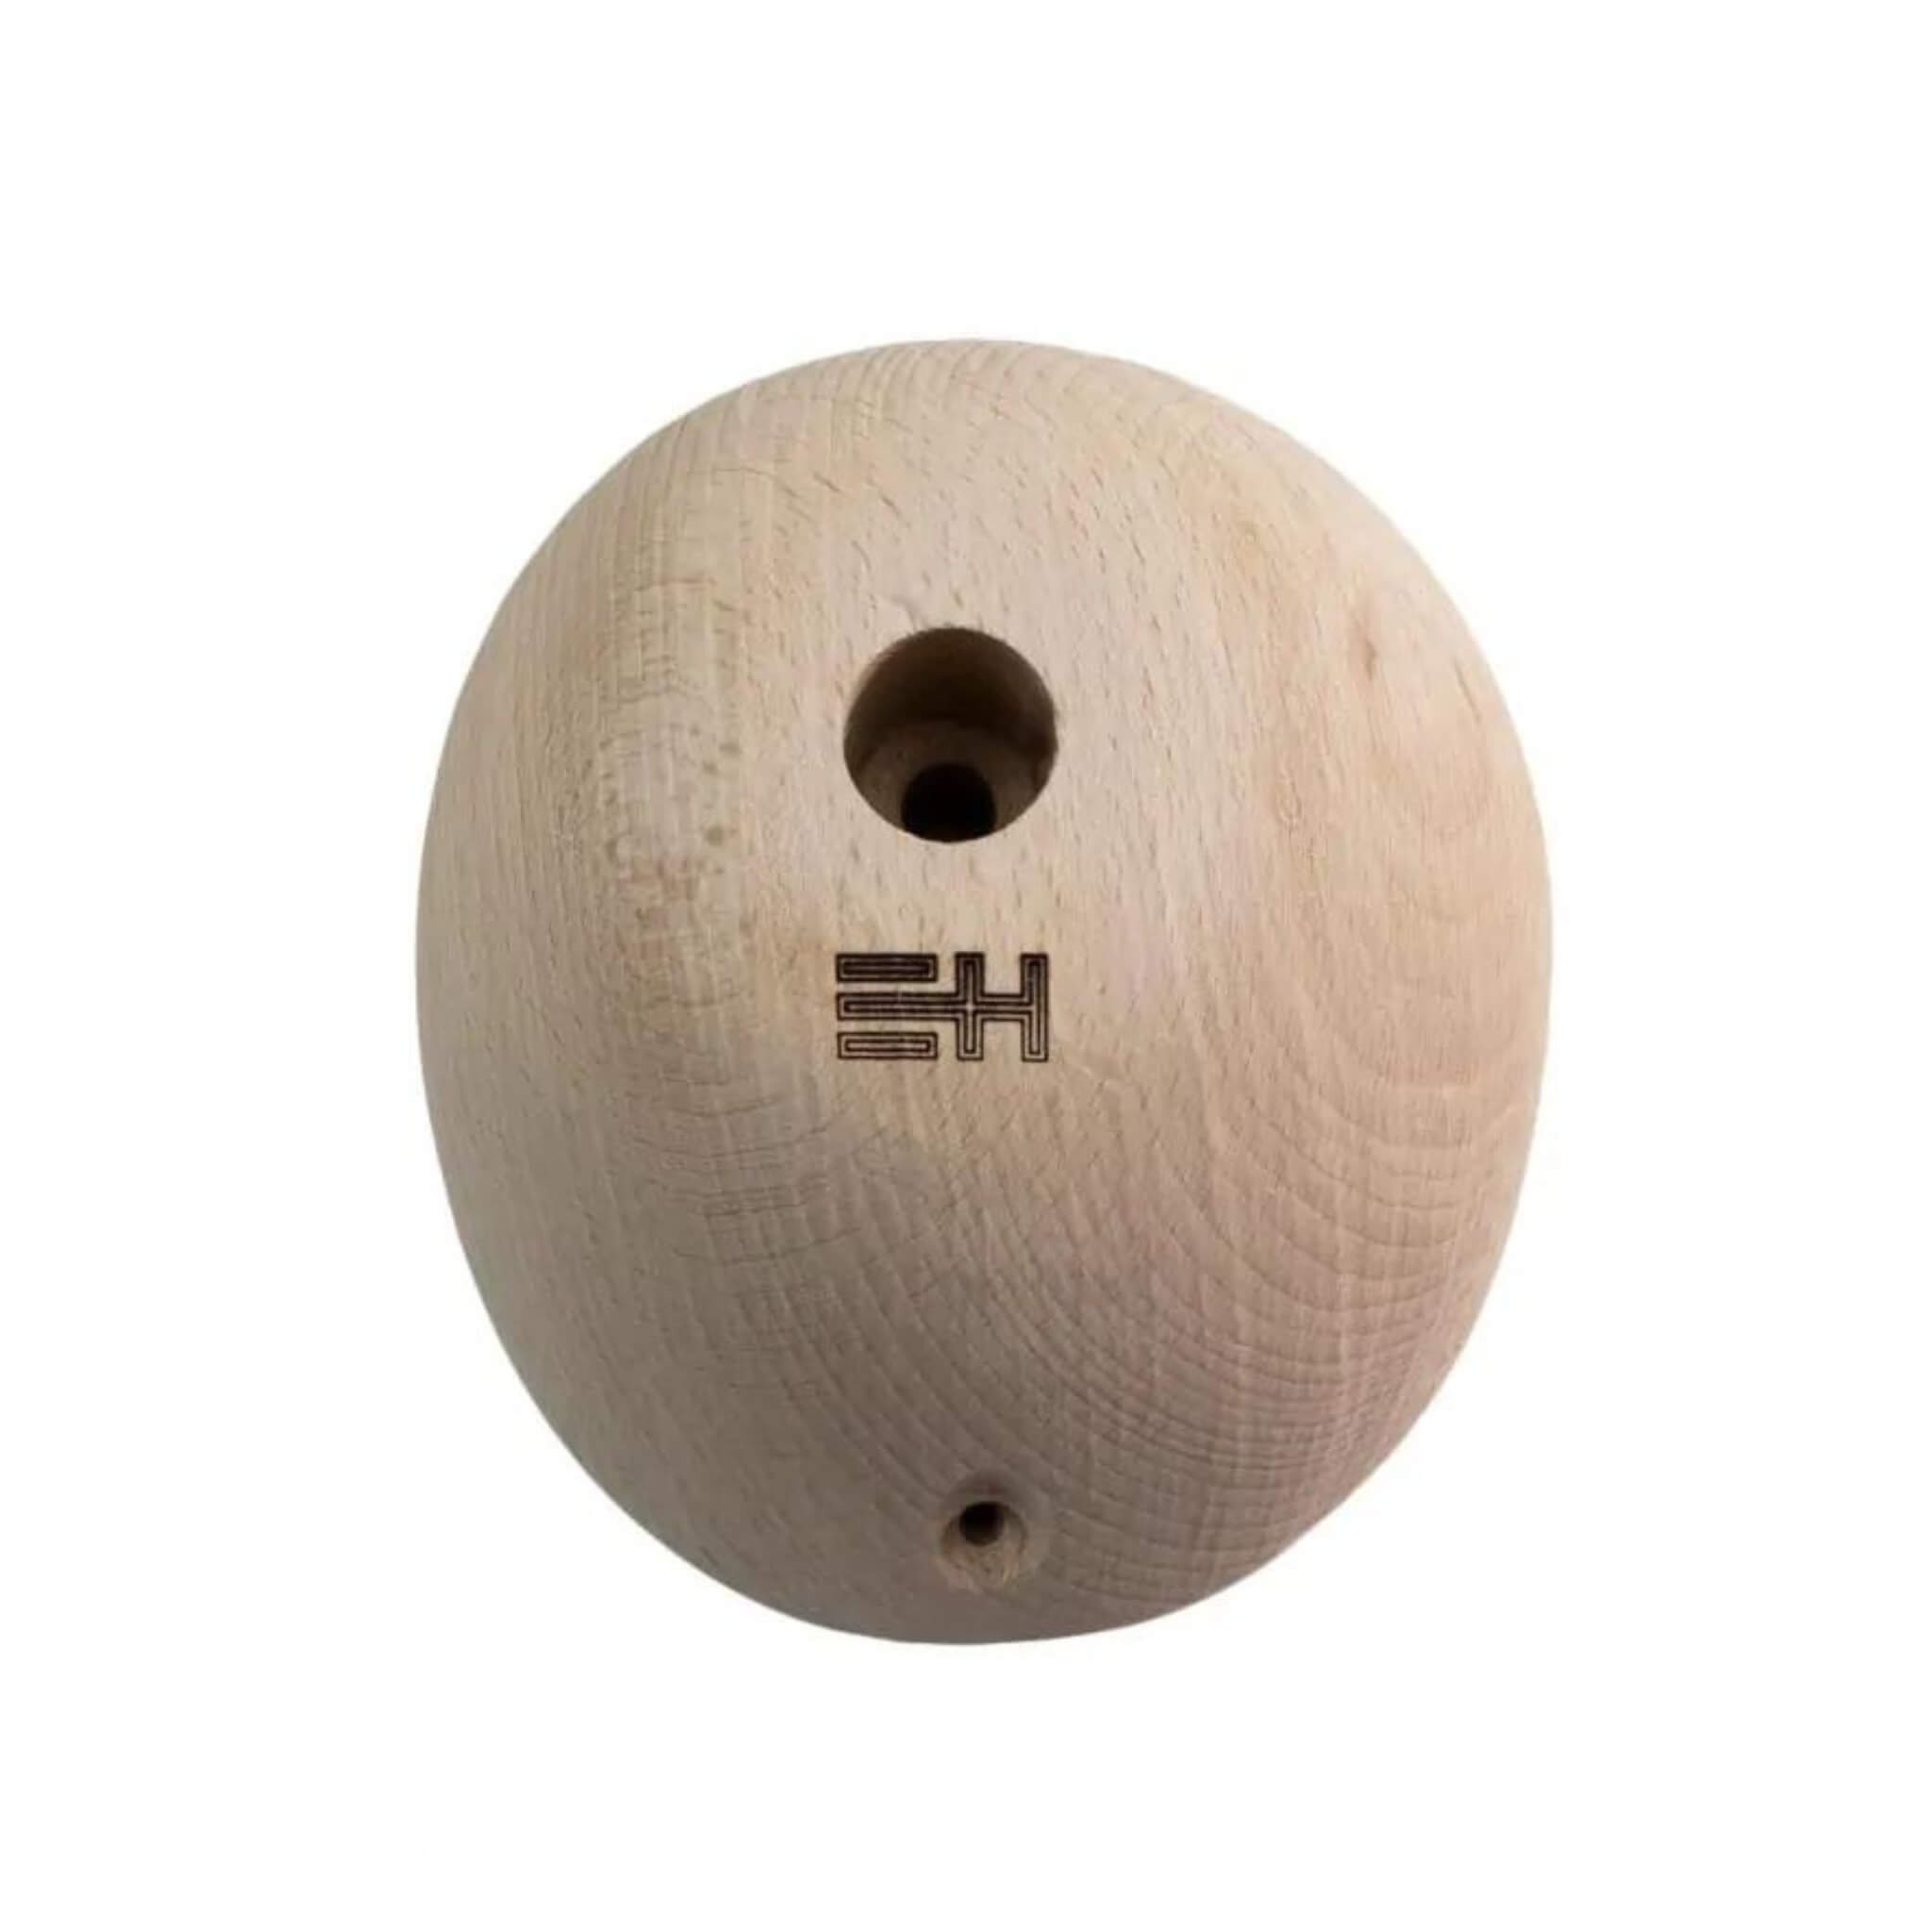 Wooden Climbing Holds From Euroholds in Different Shapes